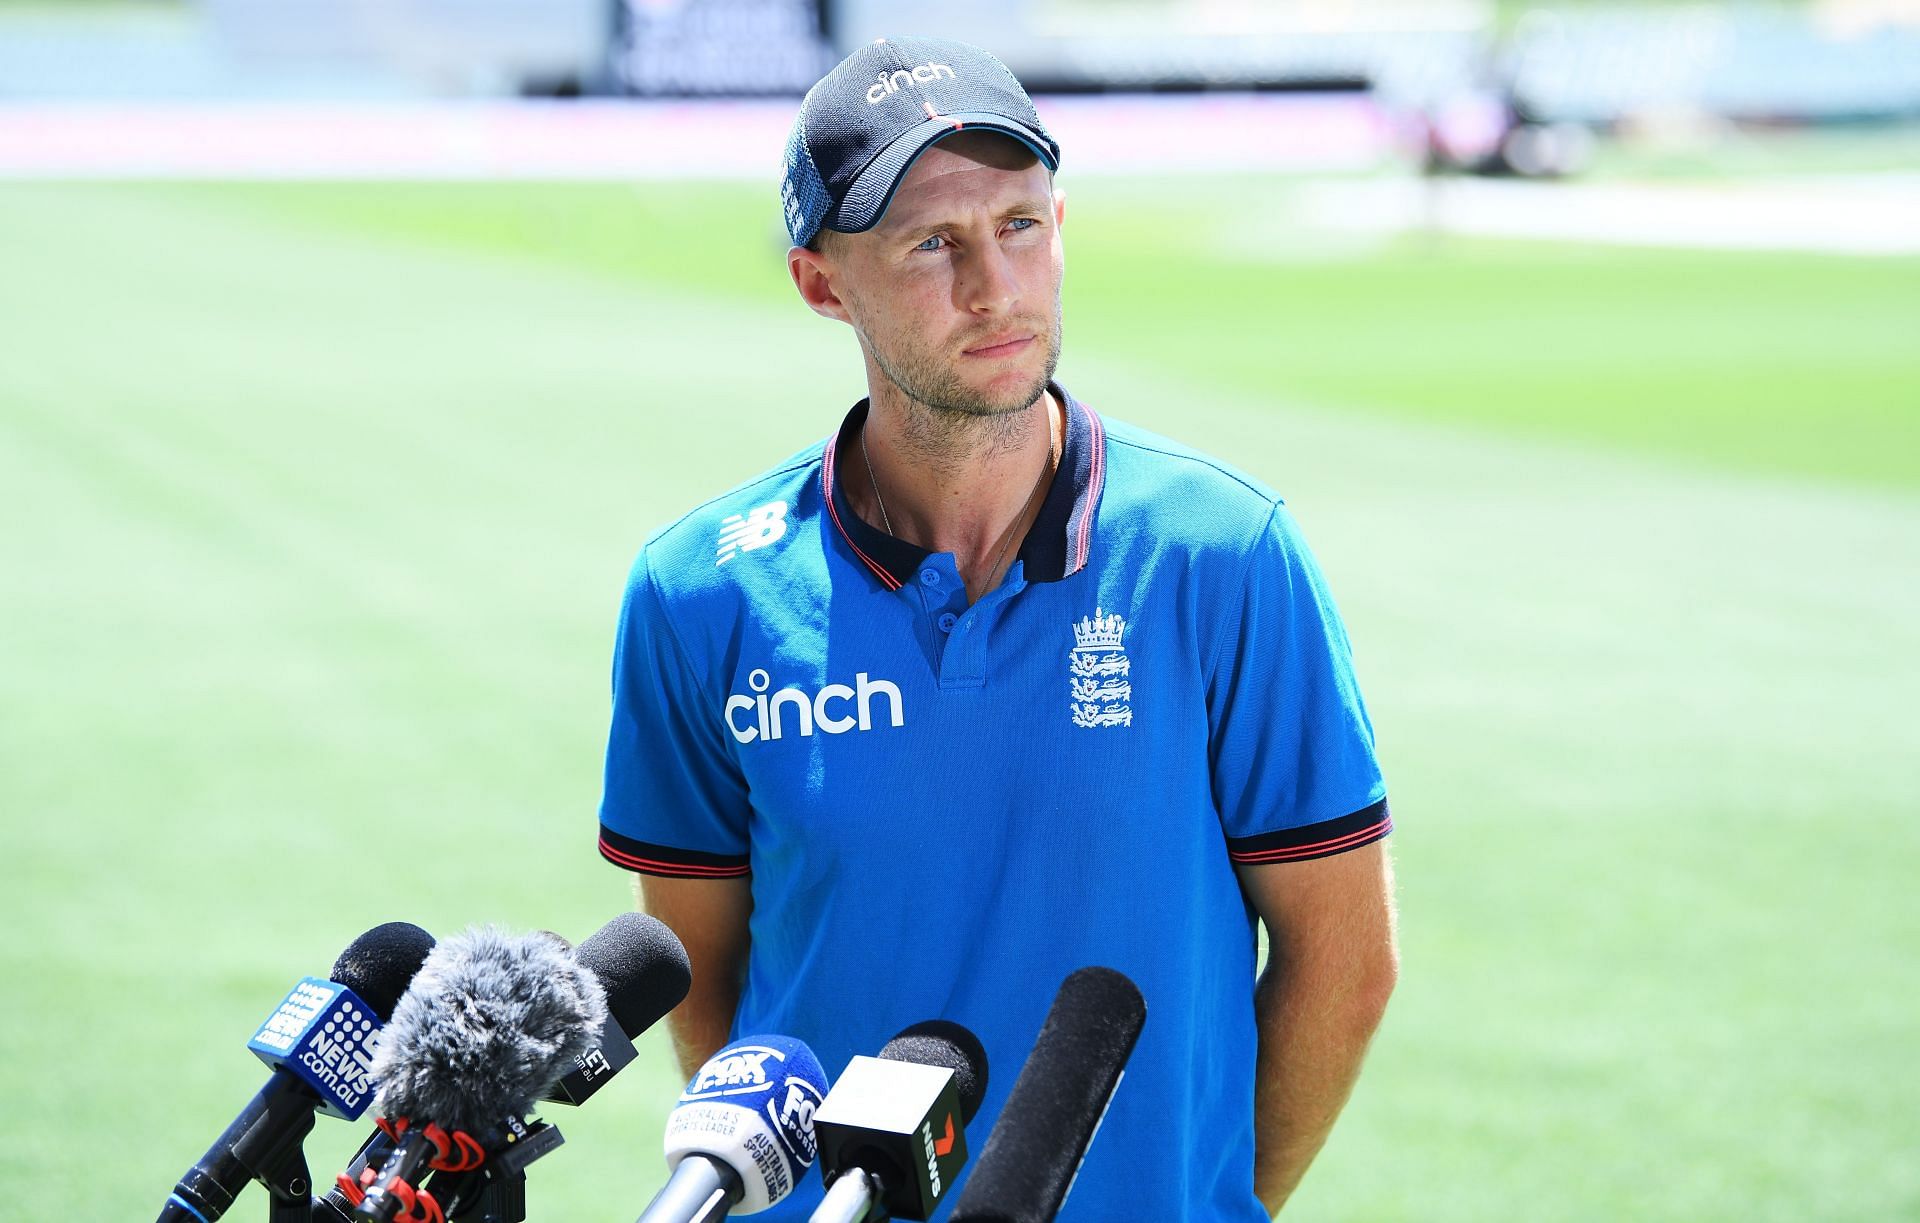 Joe Root and the rest of the England team were fined 100% of their match fees for the slow over rate in Brisbane